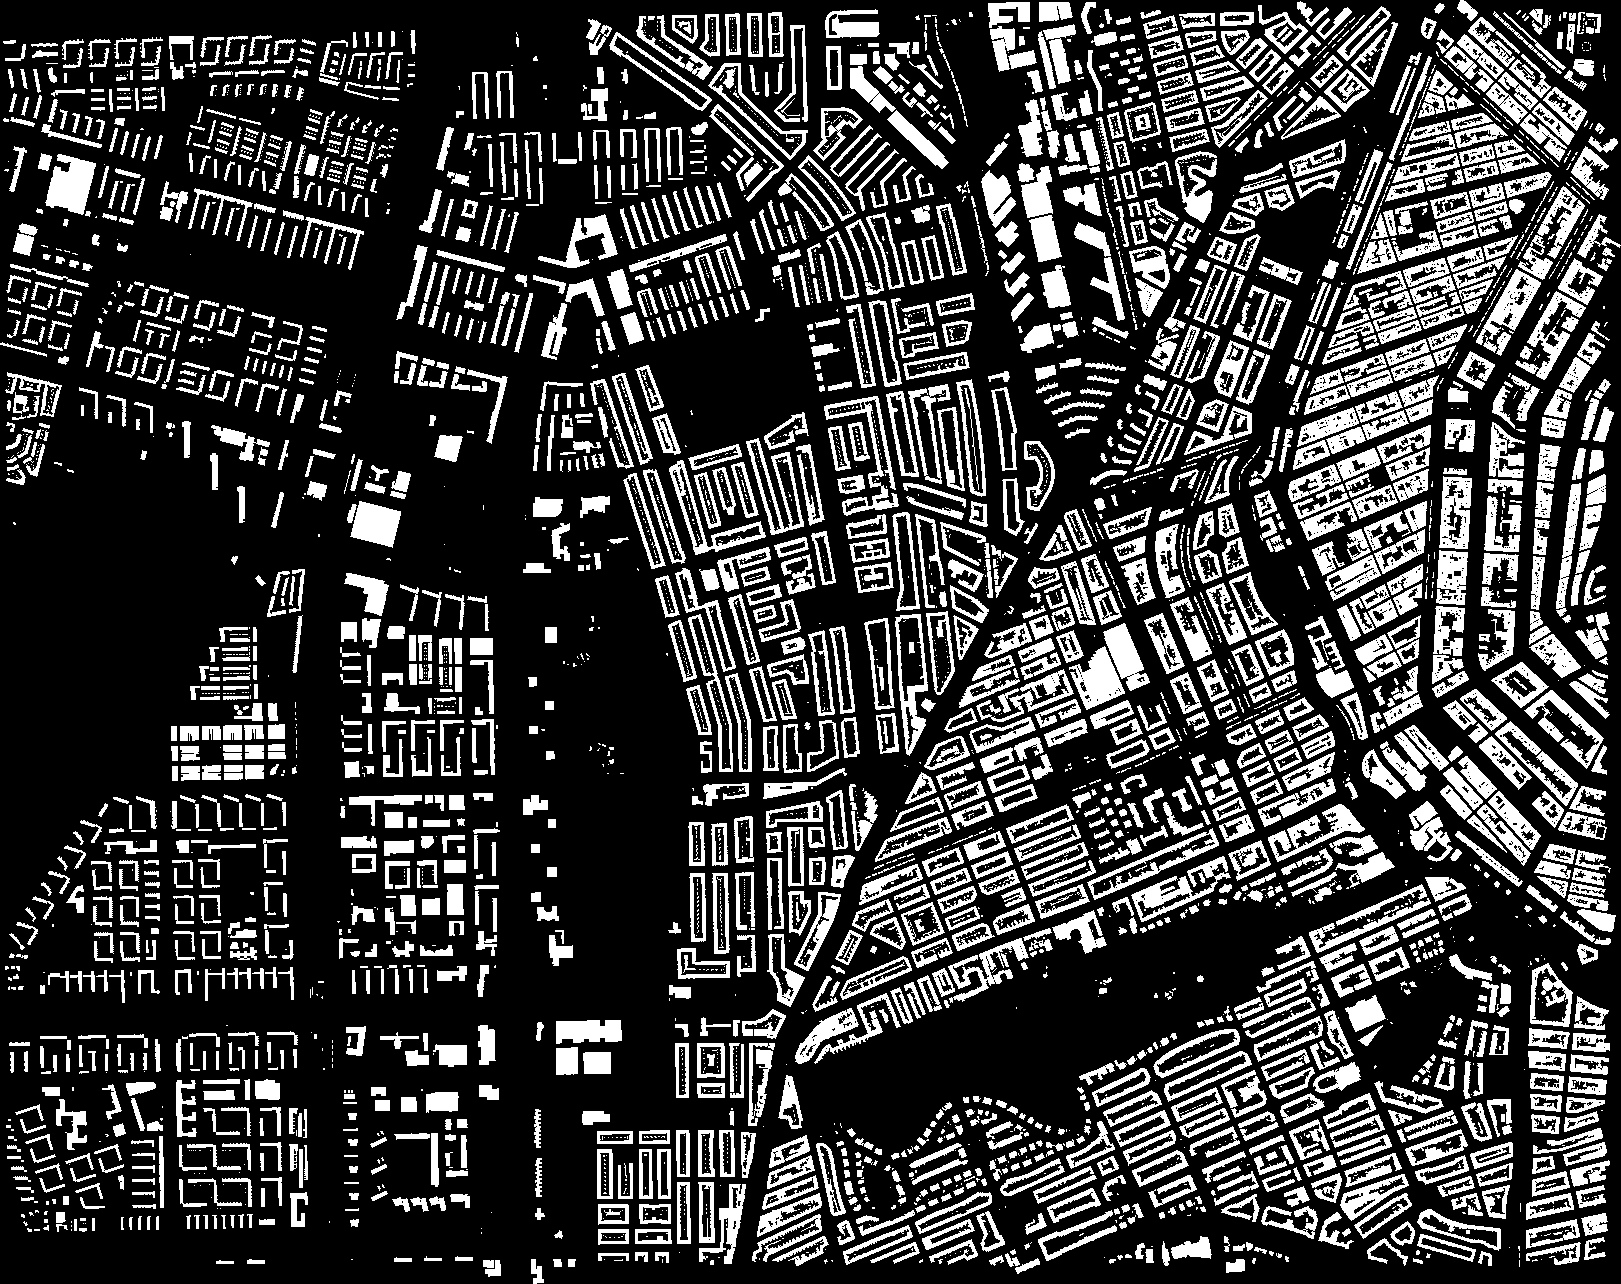 Buildings in the city of Amsterdam